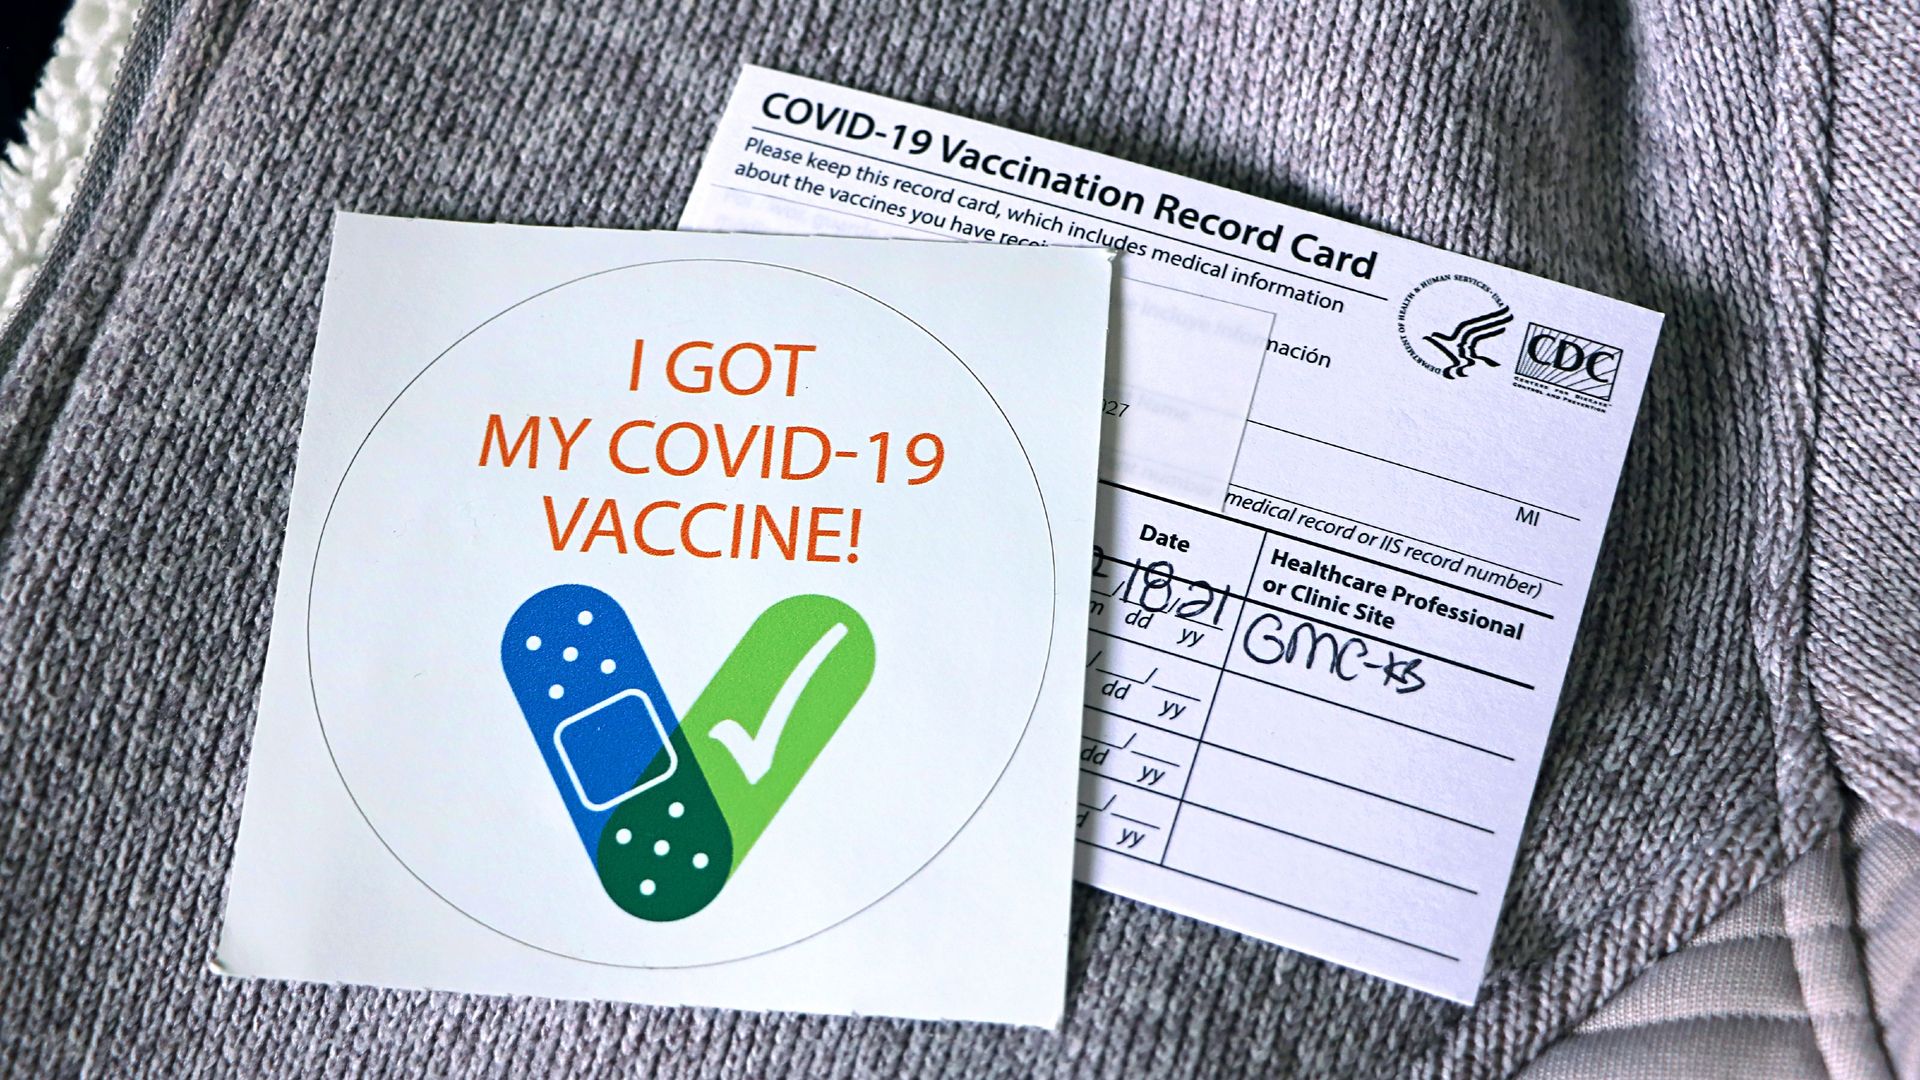 Image of a COVID-19 vaccination record card and a sticker that says, "I got my covid-19 vaccine!"